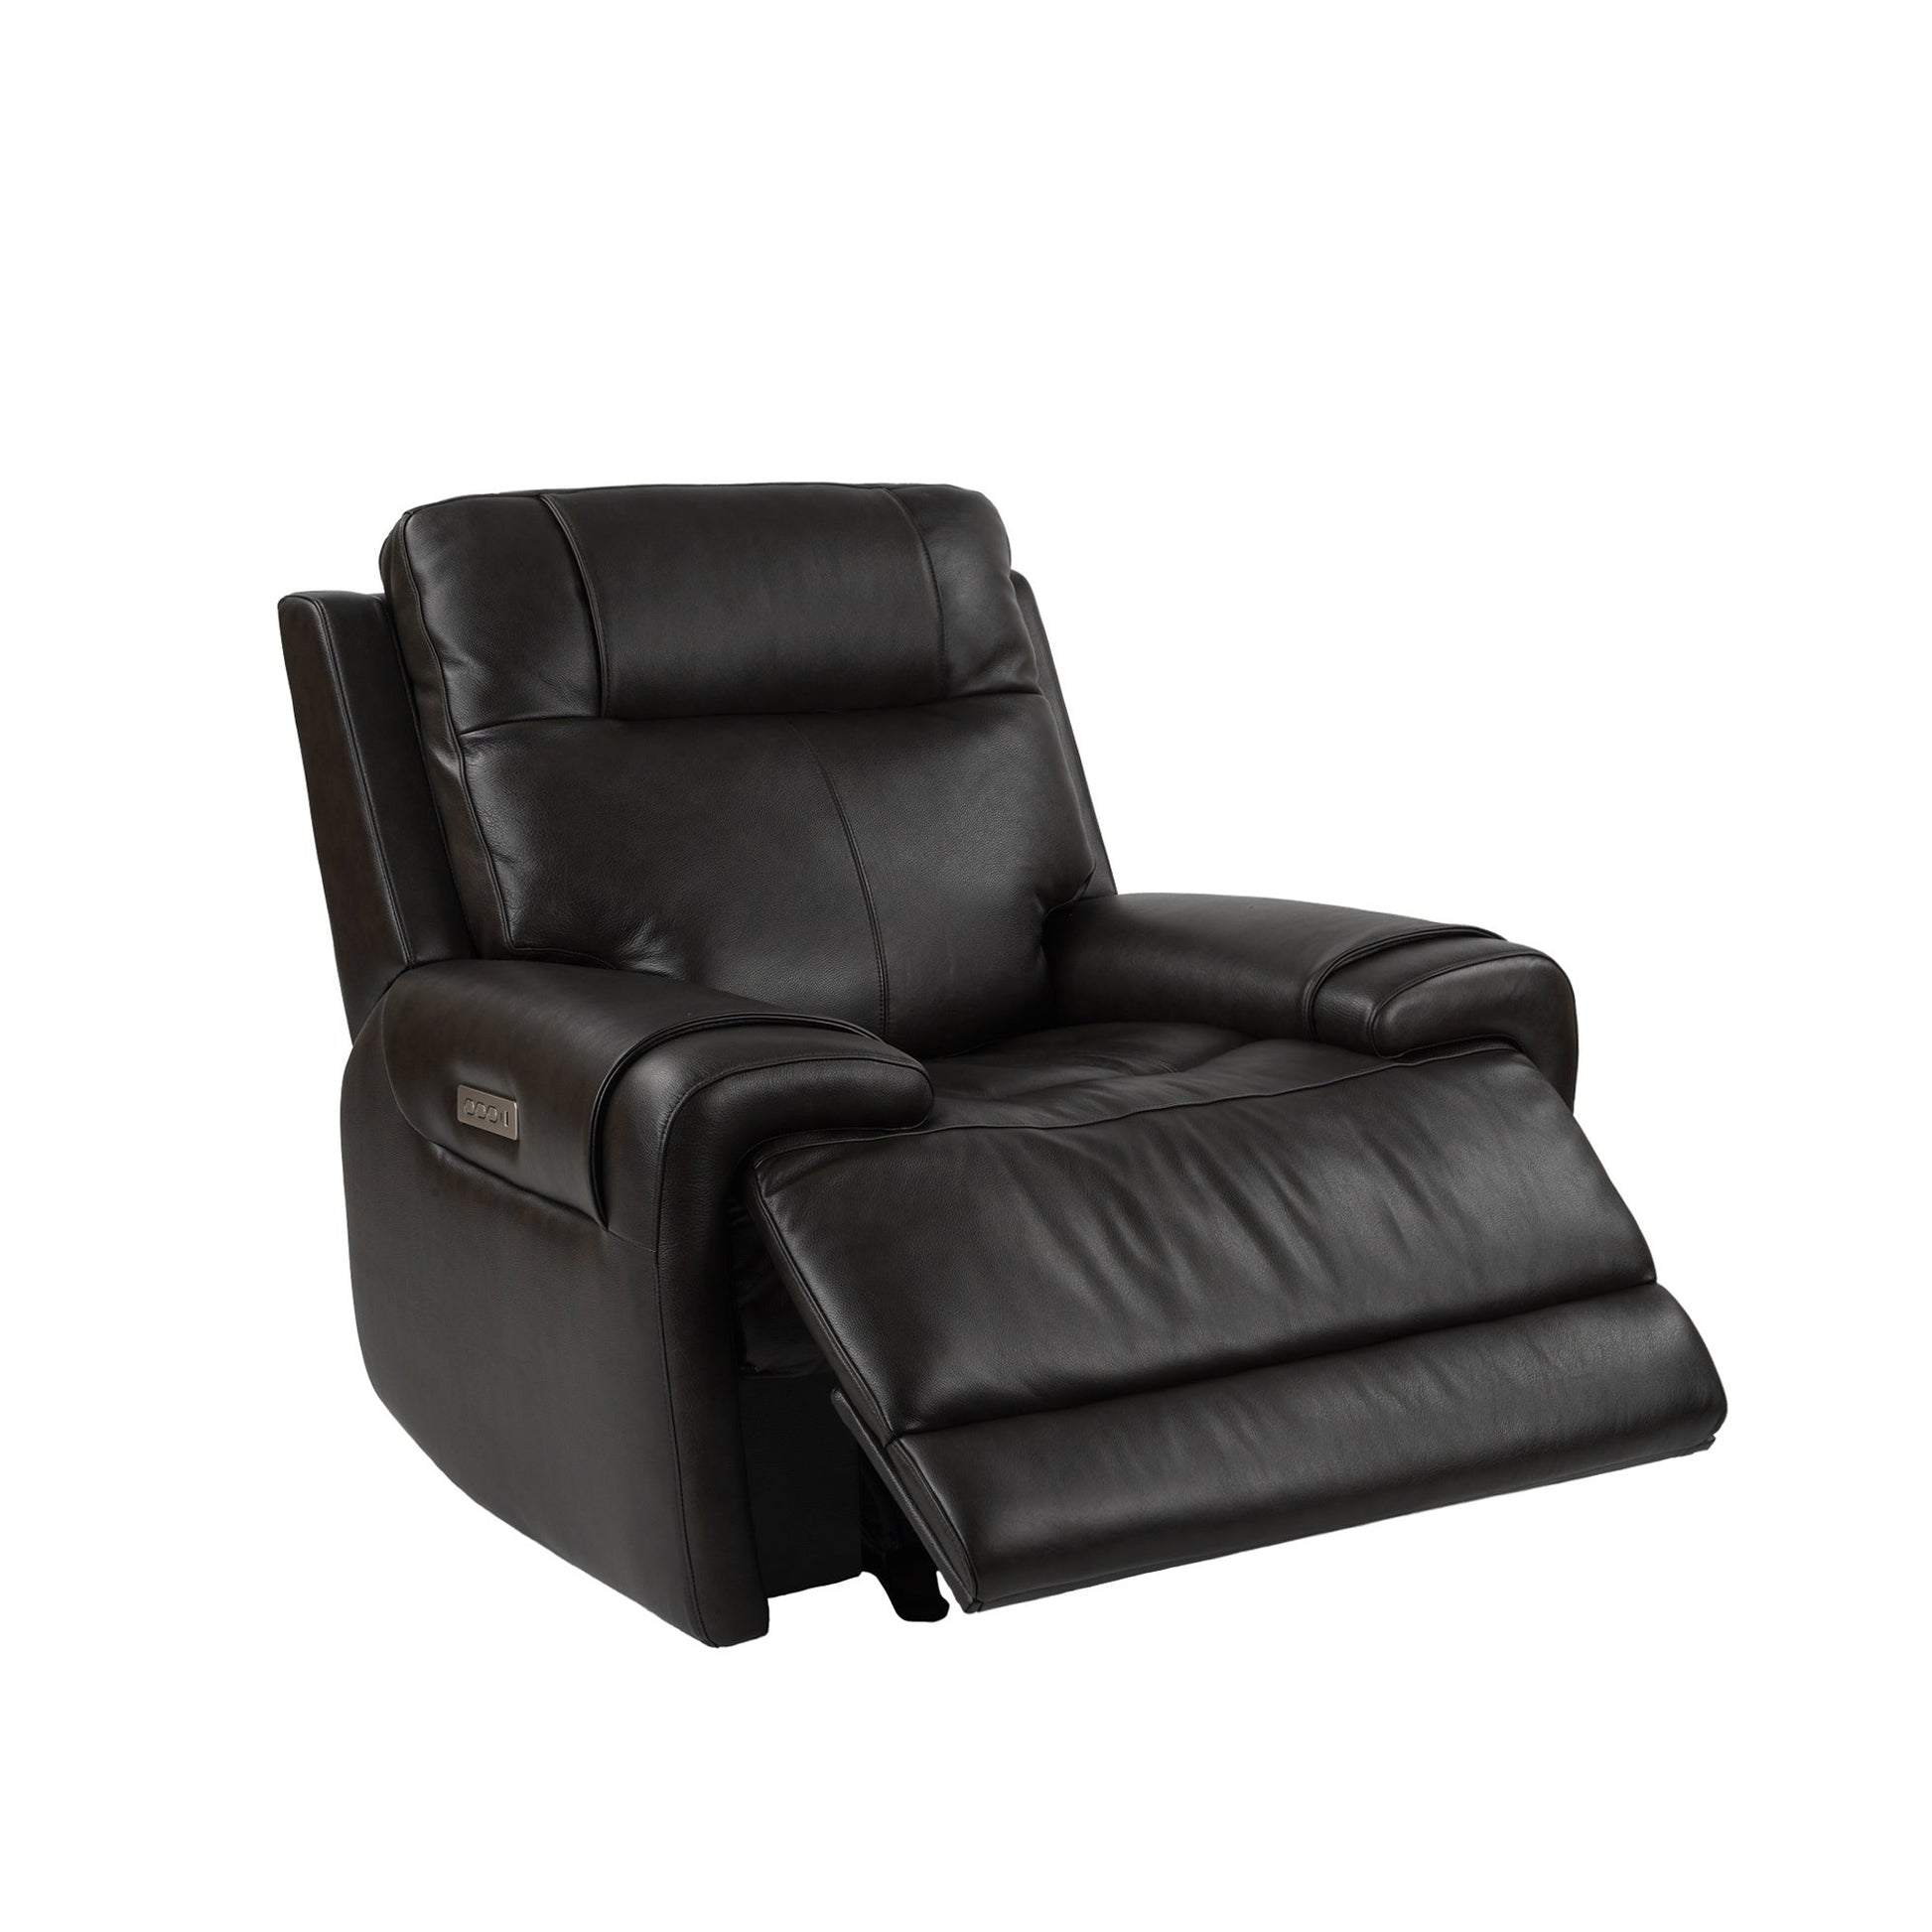 Trevor Triple Power Recliner,Genuine Leather,Glider Rock Recliner Chair,Lumbar Support,Adjustable Headrest,USB & Type C Charge Port Home Decor by Design